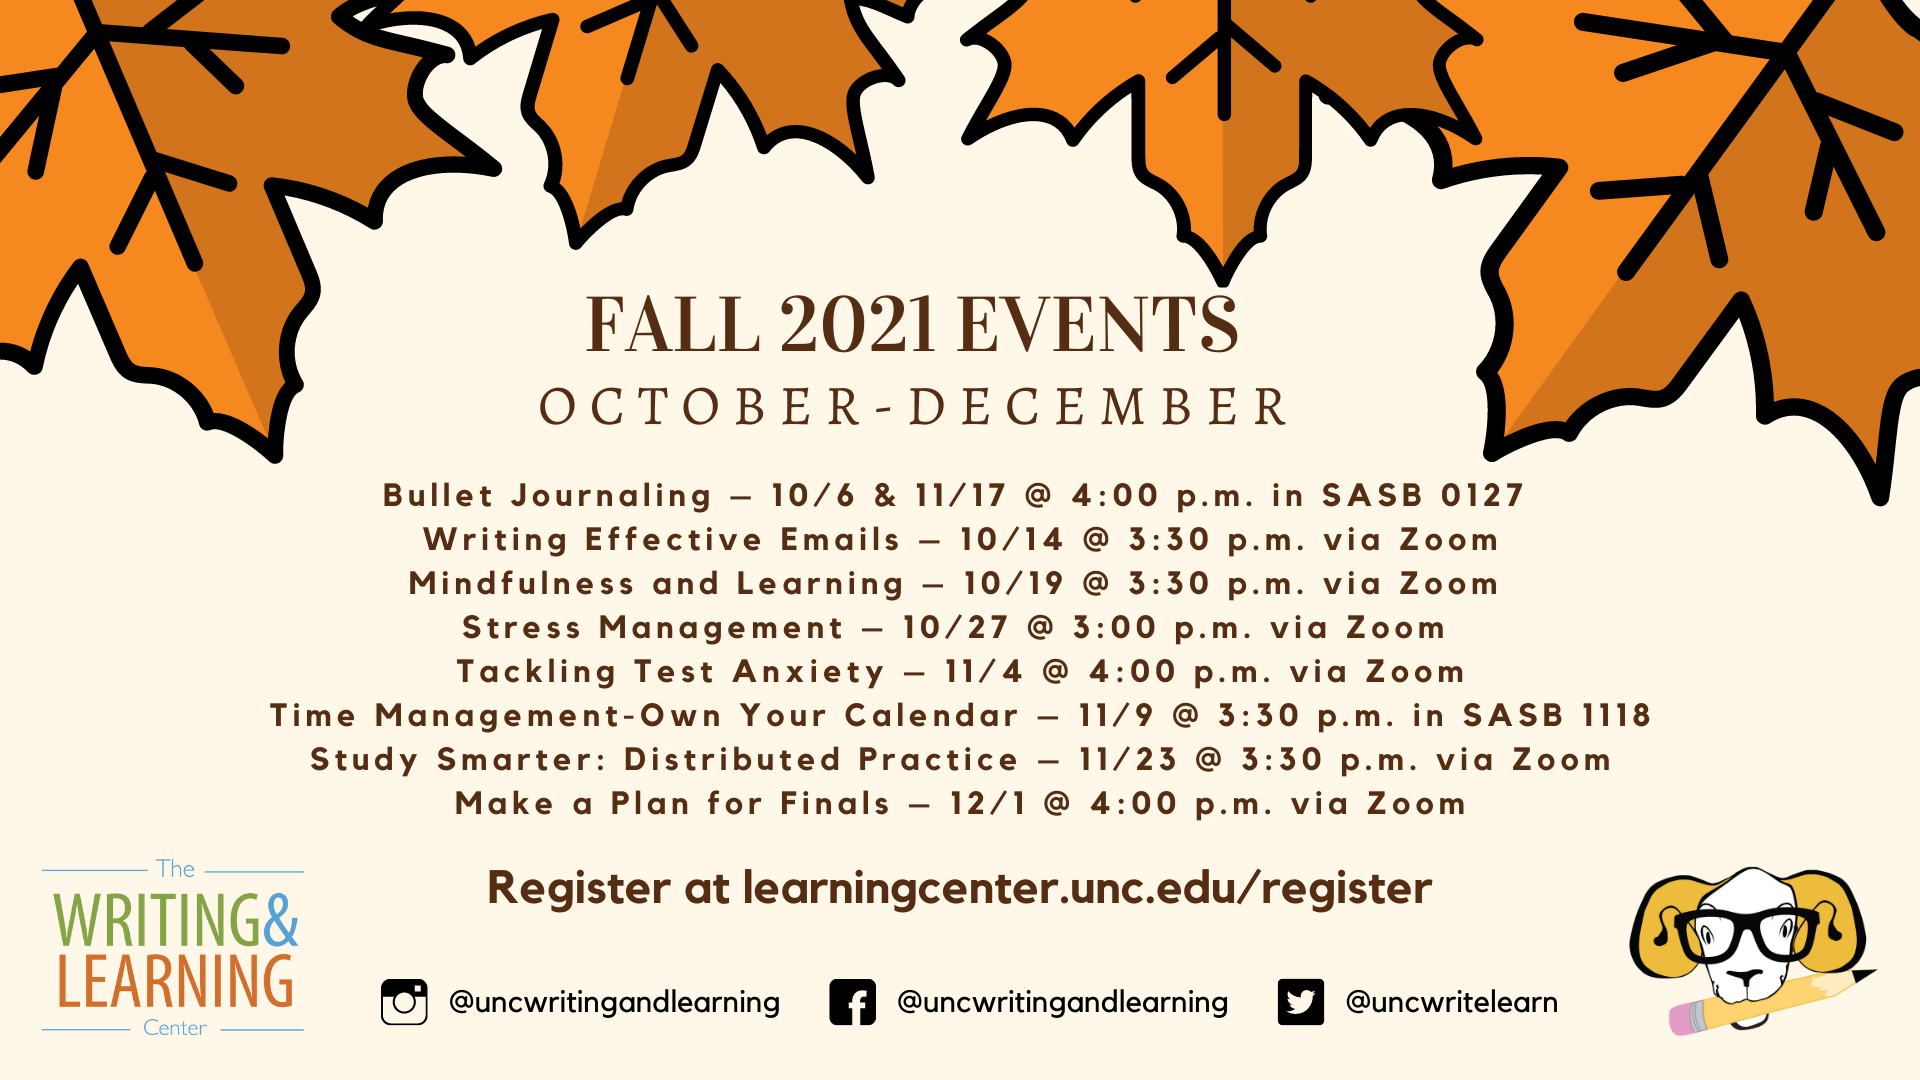 Fall 2021 Events October - December at the Writing and Learning Center